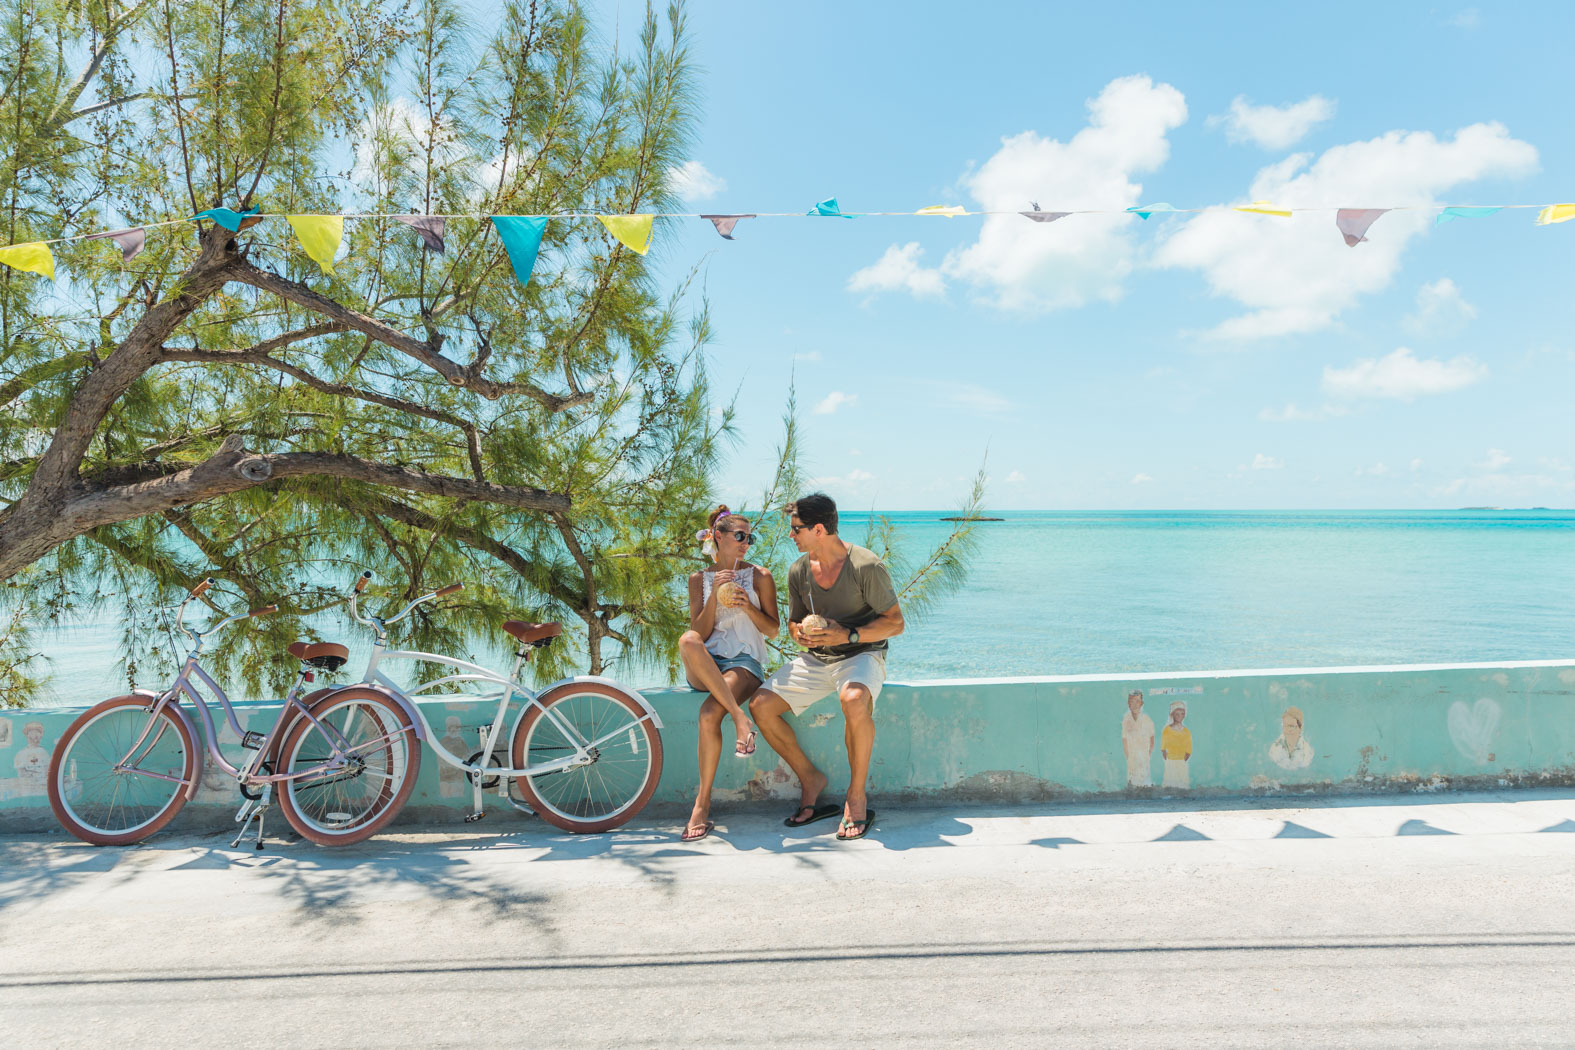 A couple enjoys a leisurely afternoon on a wall next to a tree, their bicycles parked nearby.